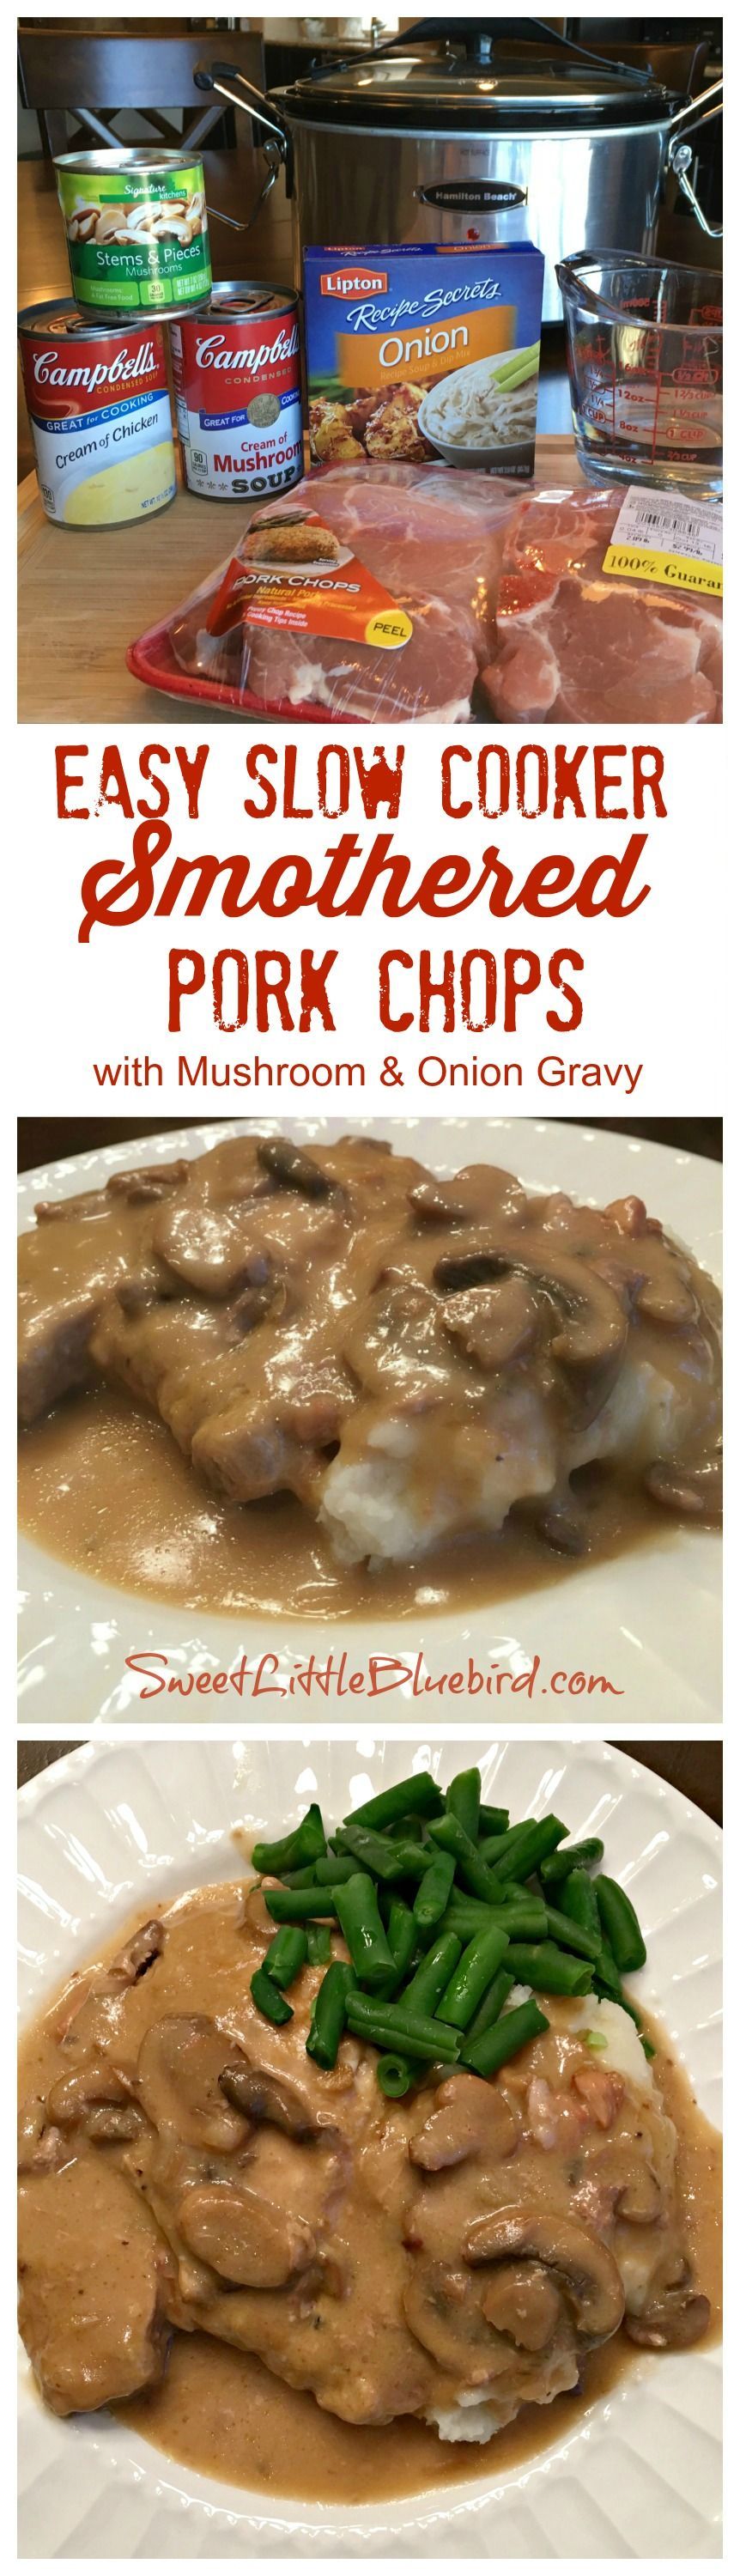 Easy Slow Cooker Smothered Pork Chops with Mushroom and Onion Gravy –  Comfort food thats simple to make, so good. With just a few